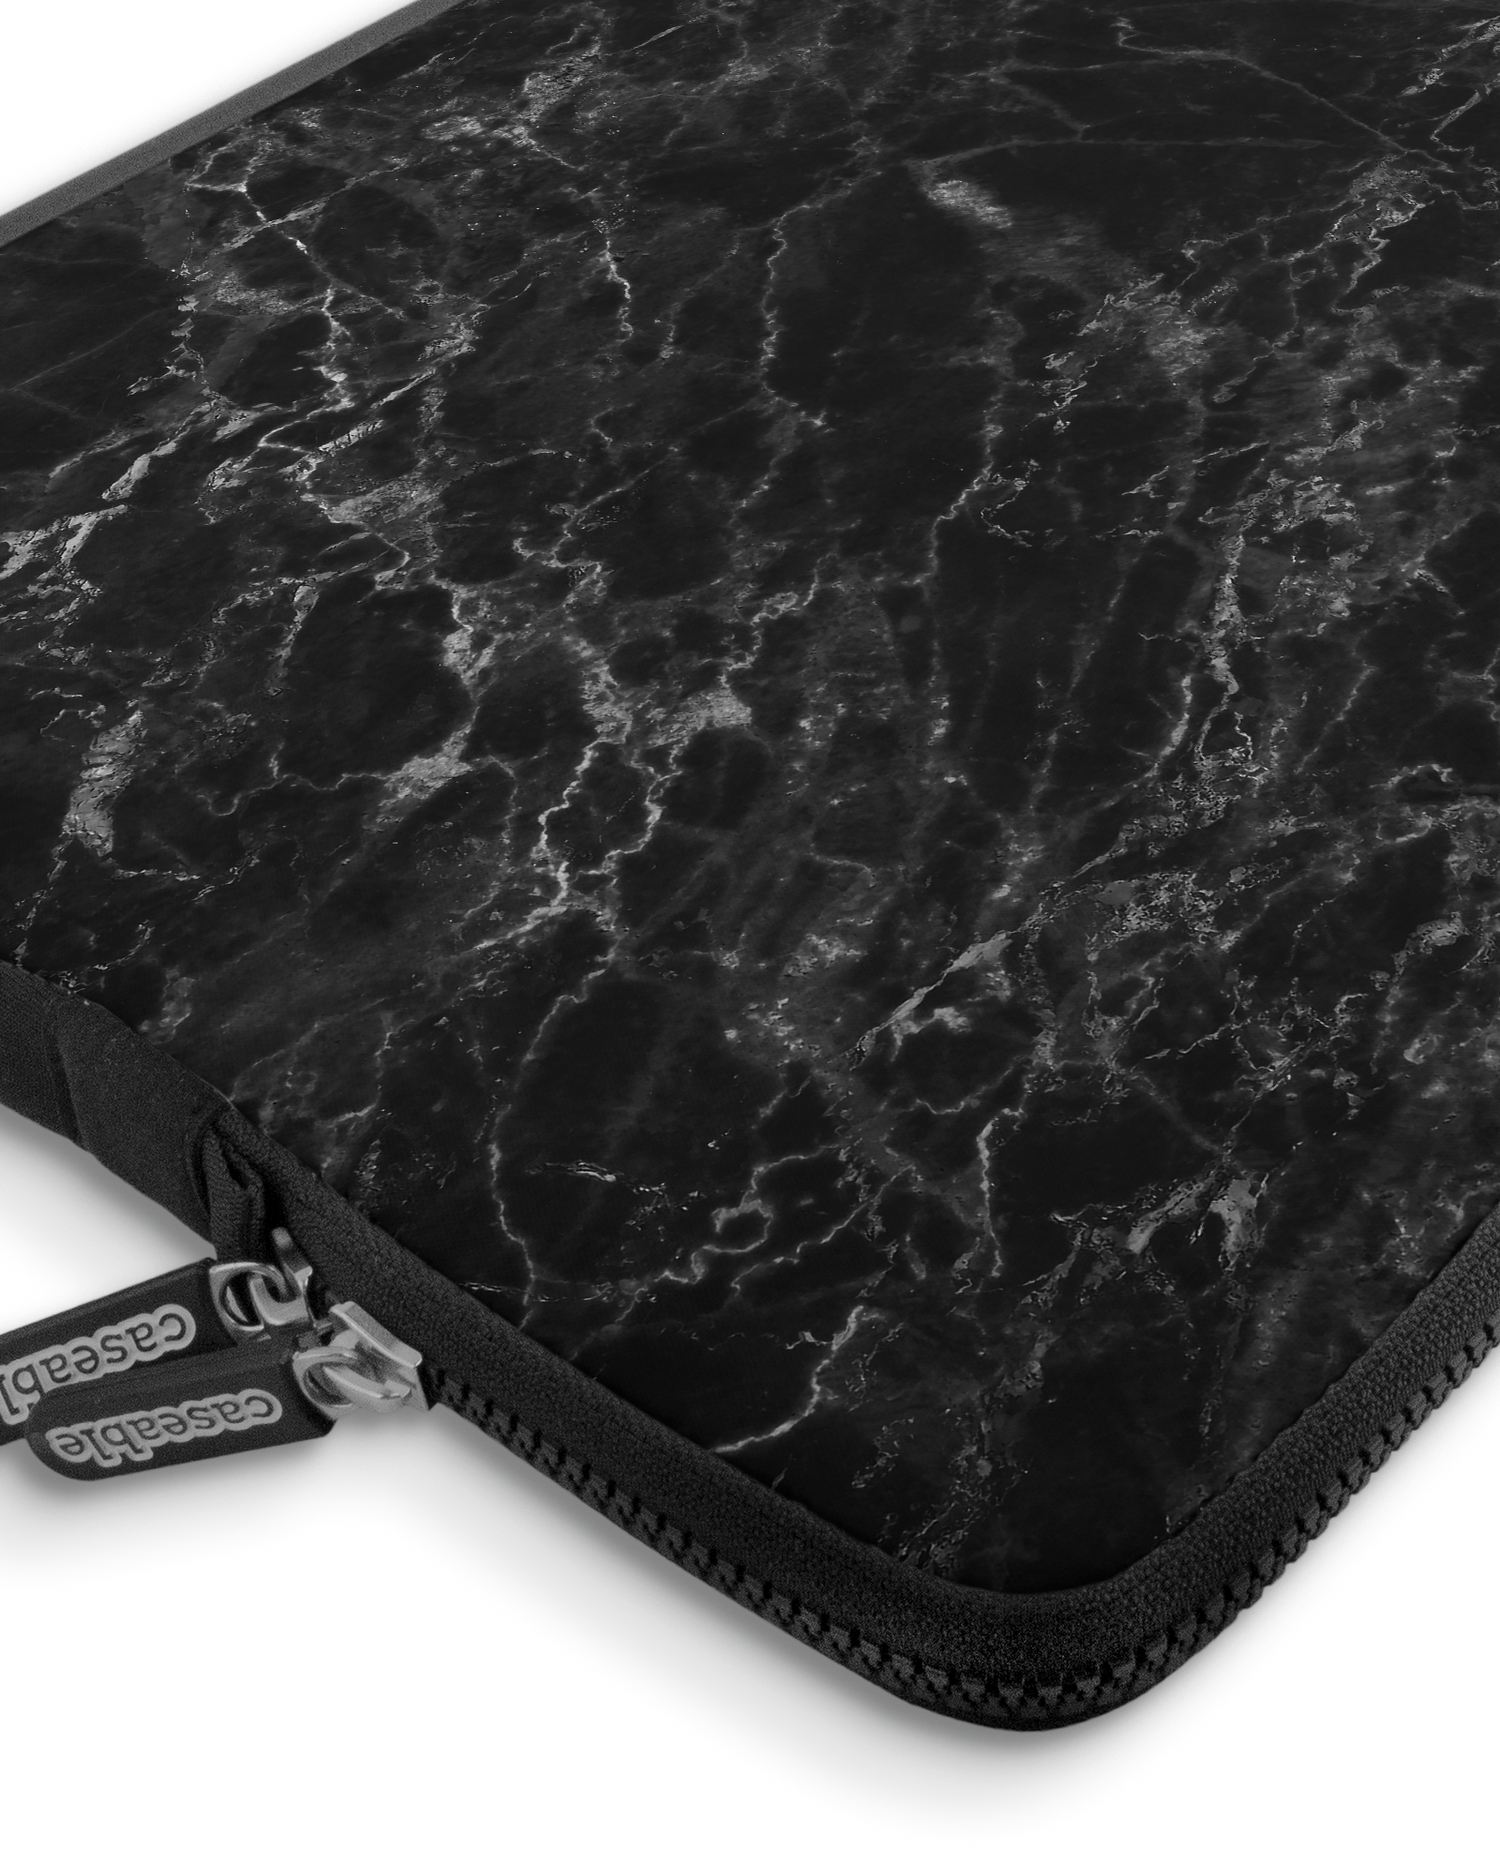 Midnight Marble Premium Laptop Bag 17 inch with device inside